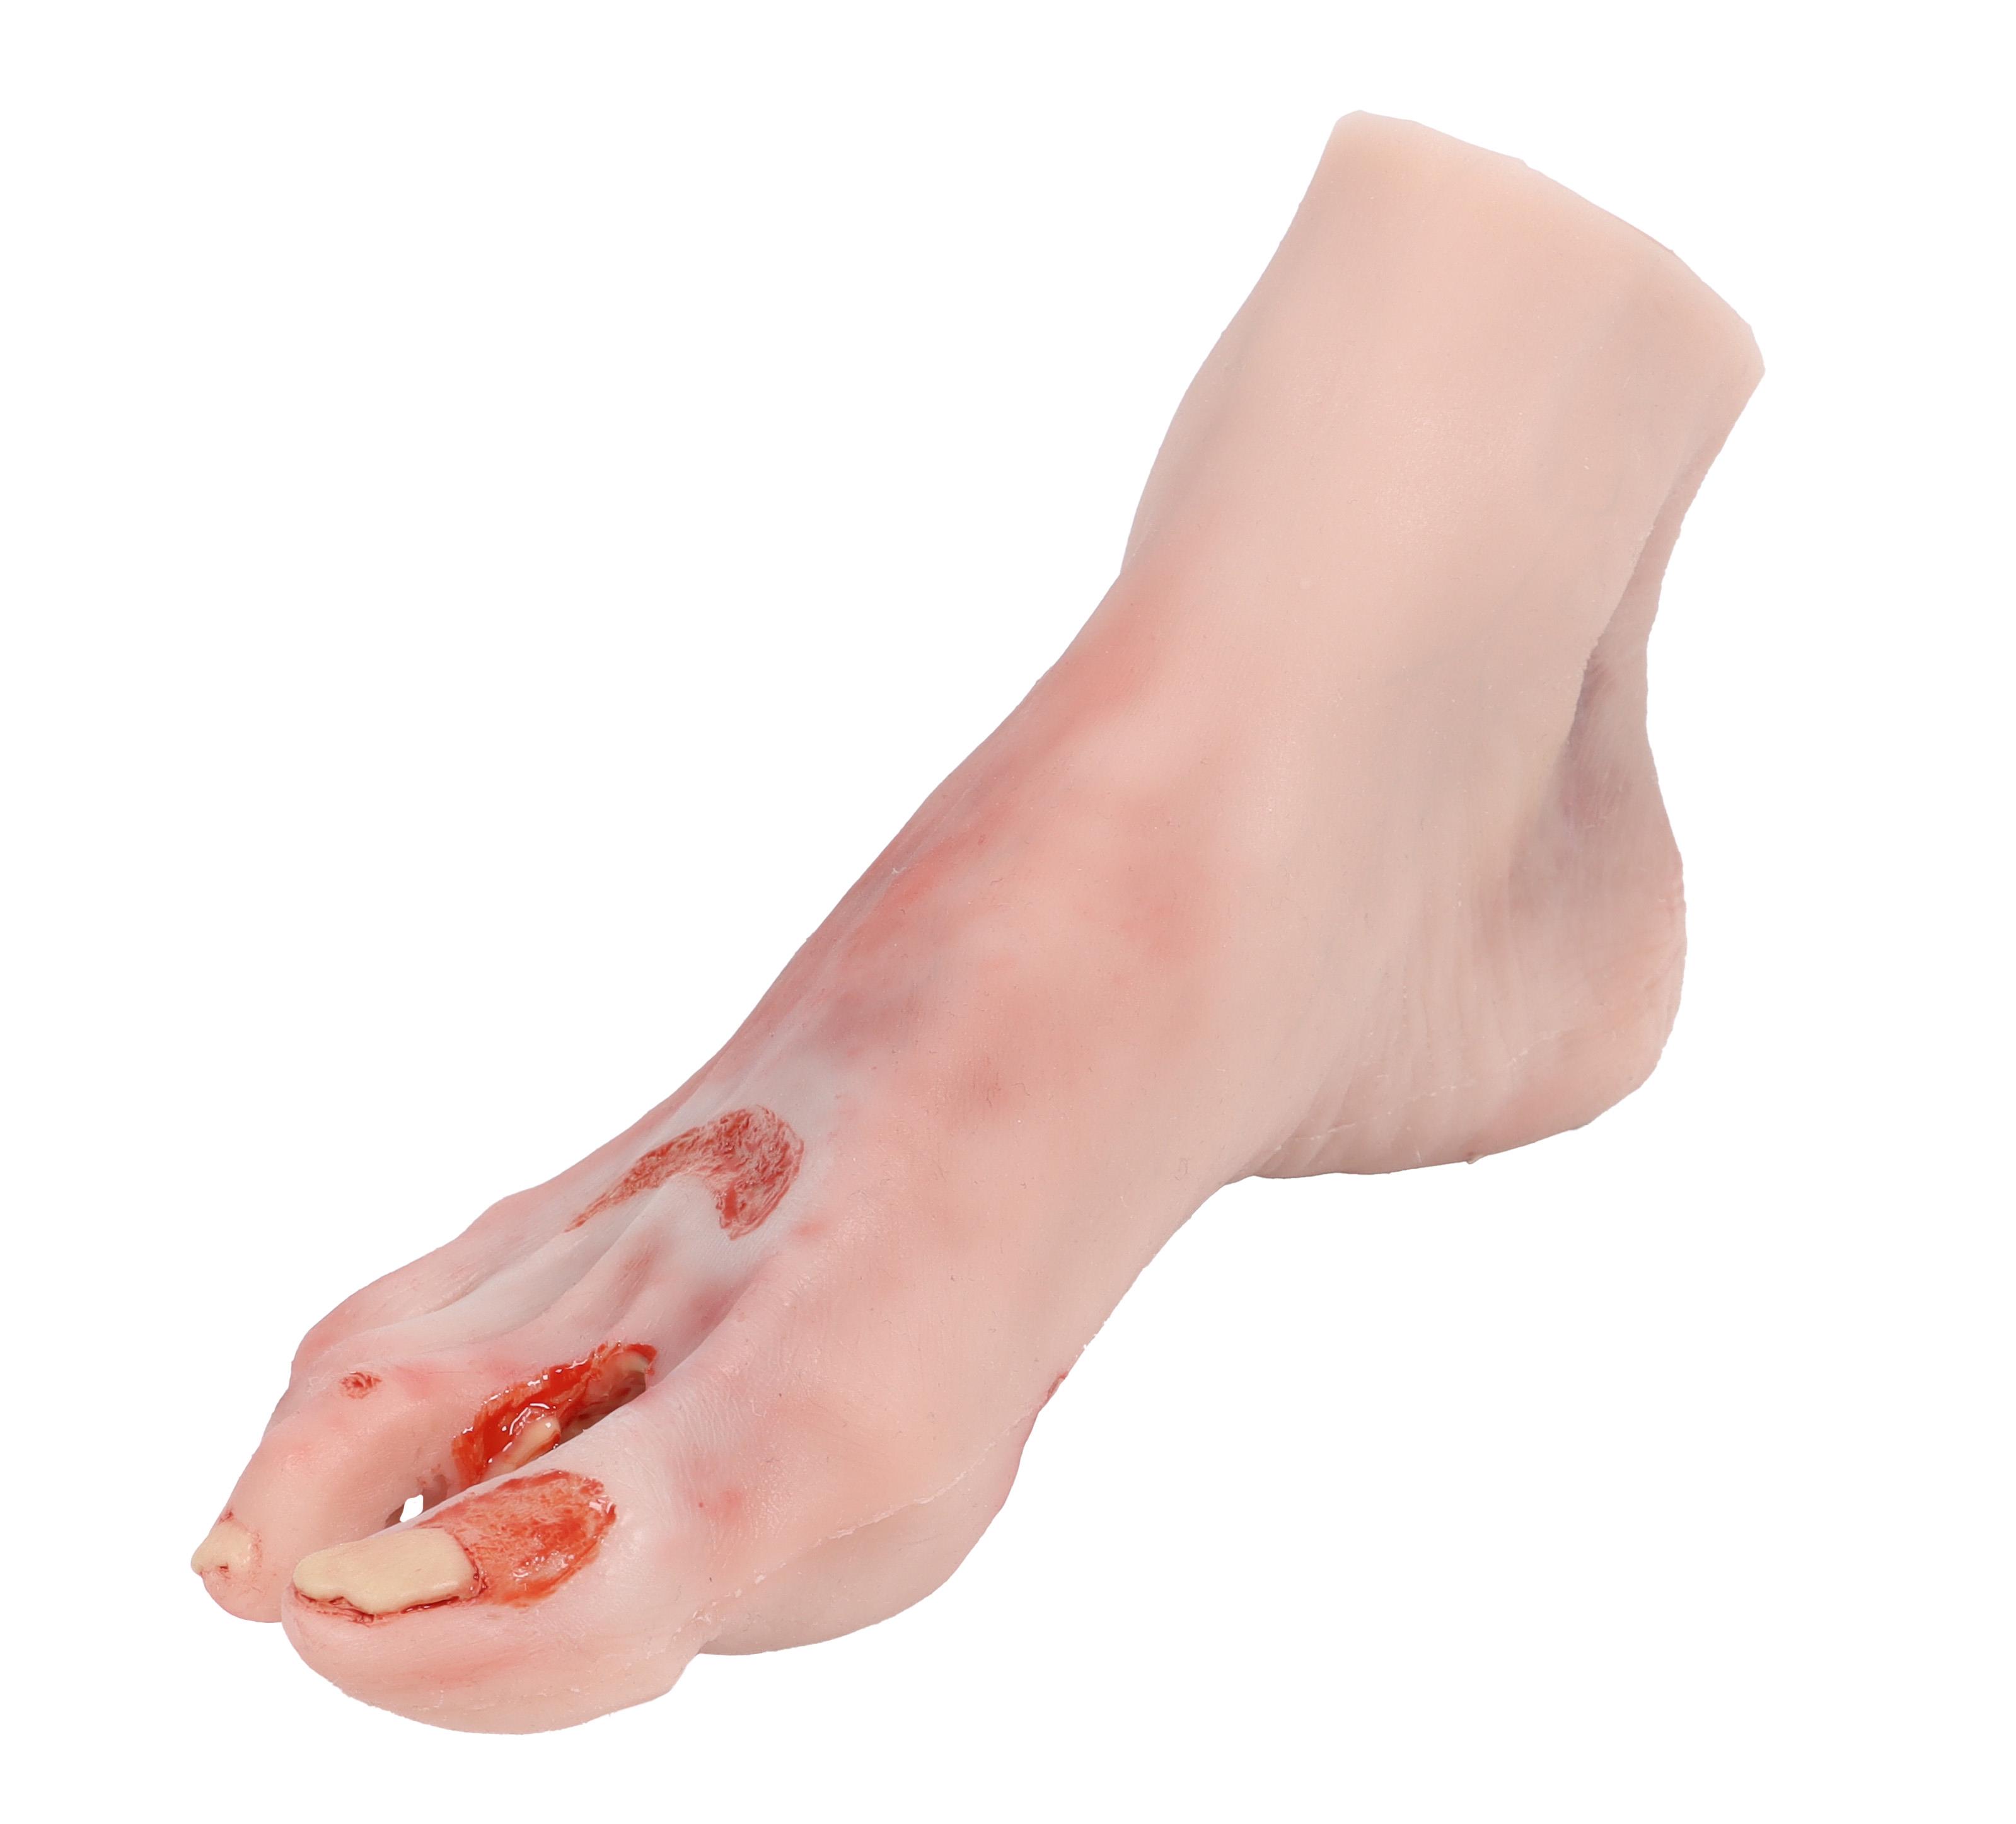 Wound-foot-with-diabetic-foot-syndrome-severe-stage-1